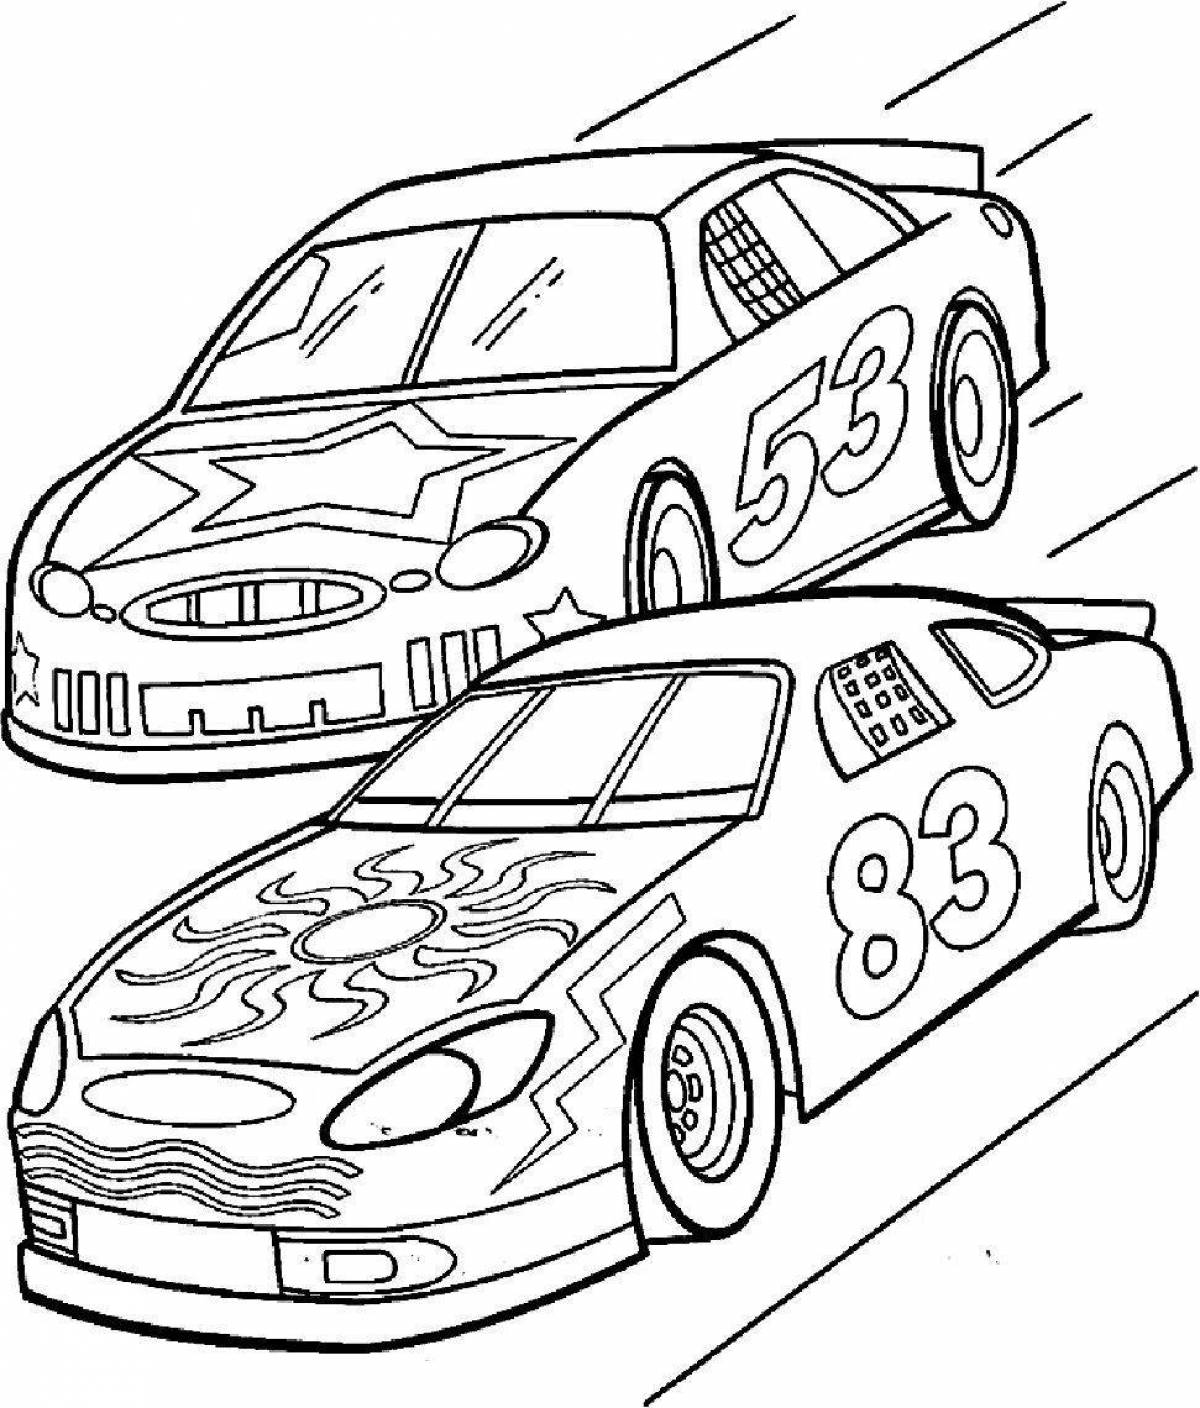 Fabulous cars coloring pages for boys 8-9 years old